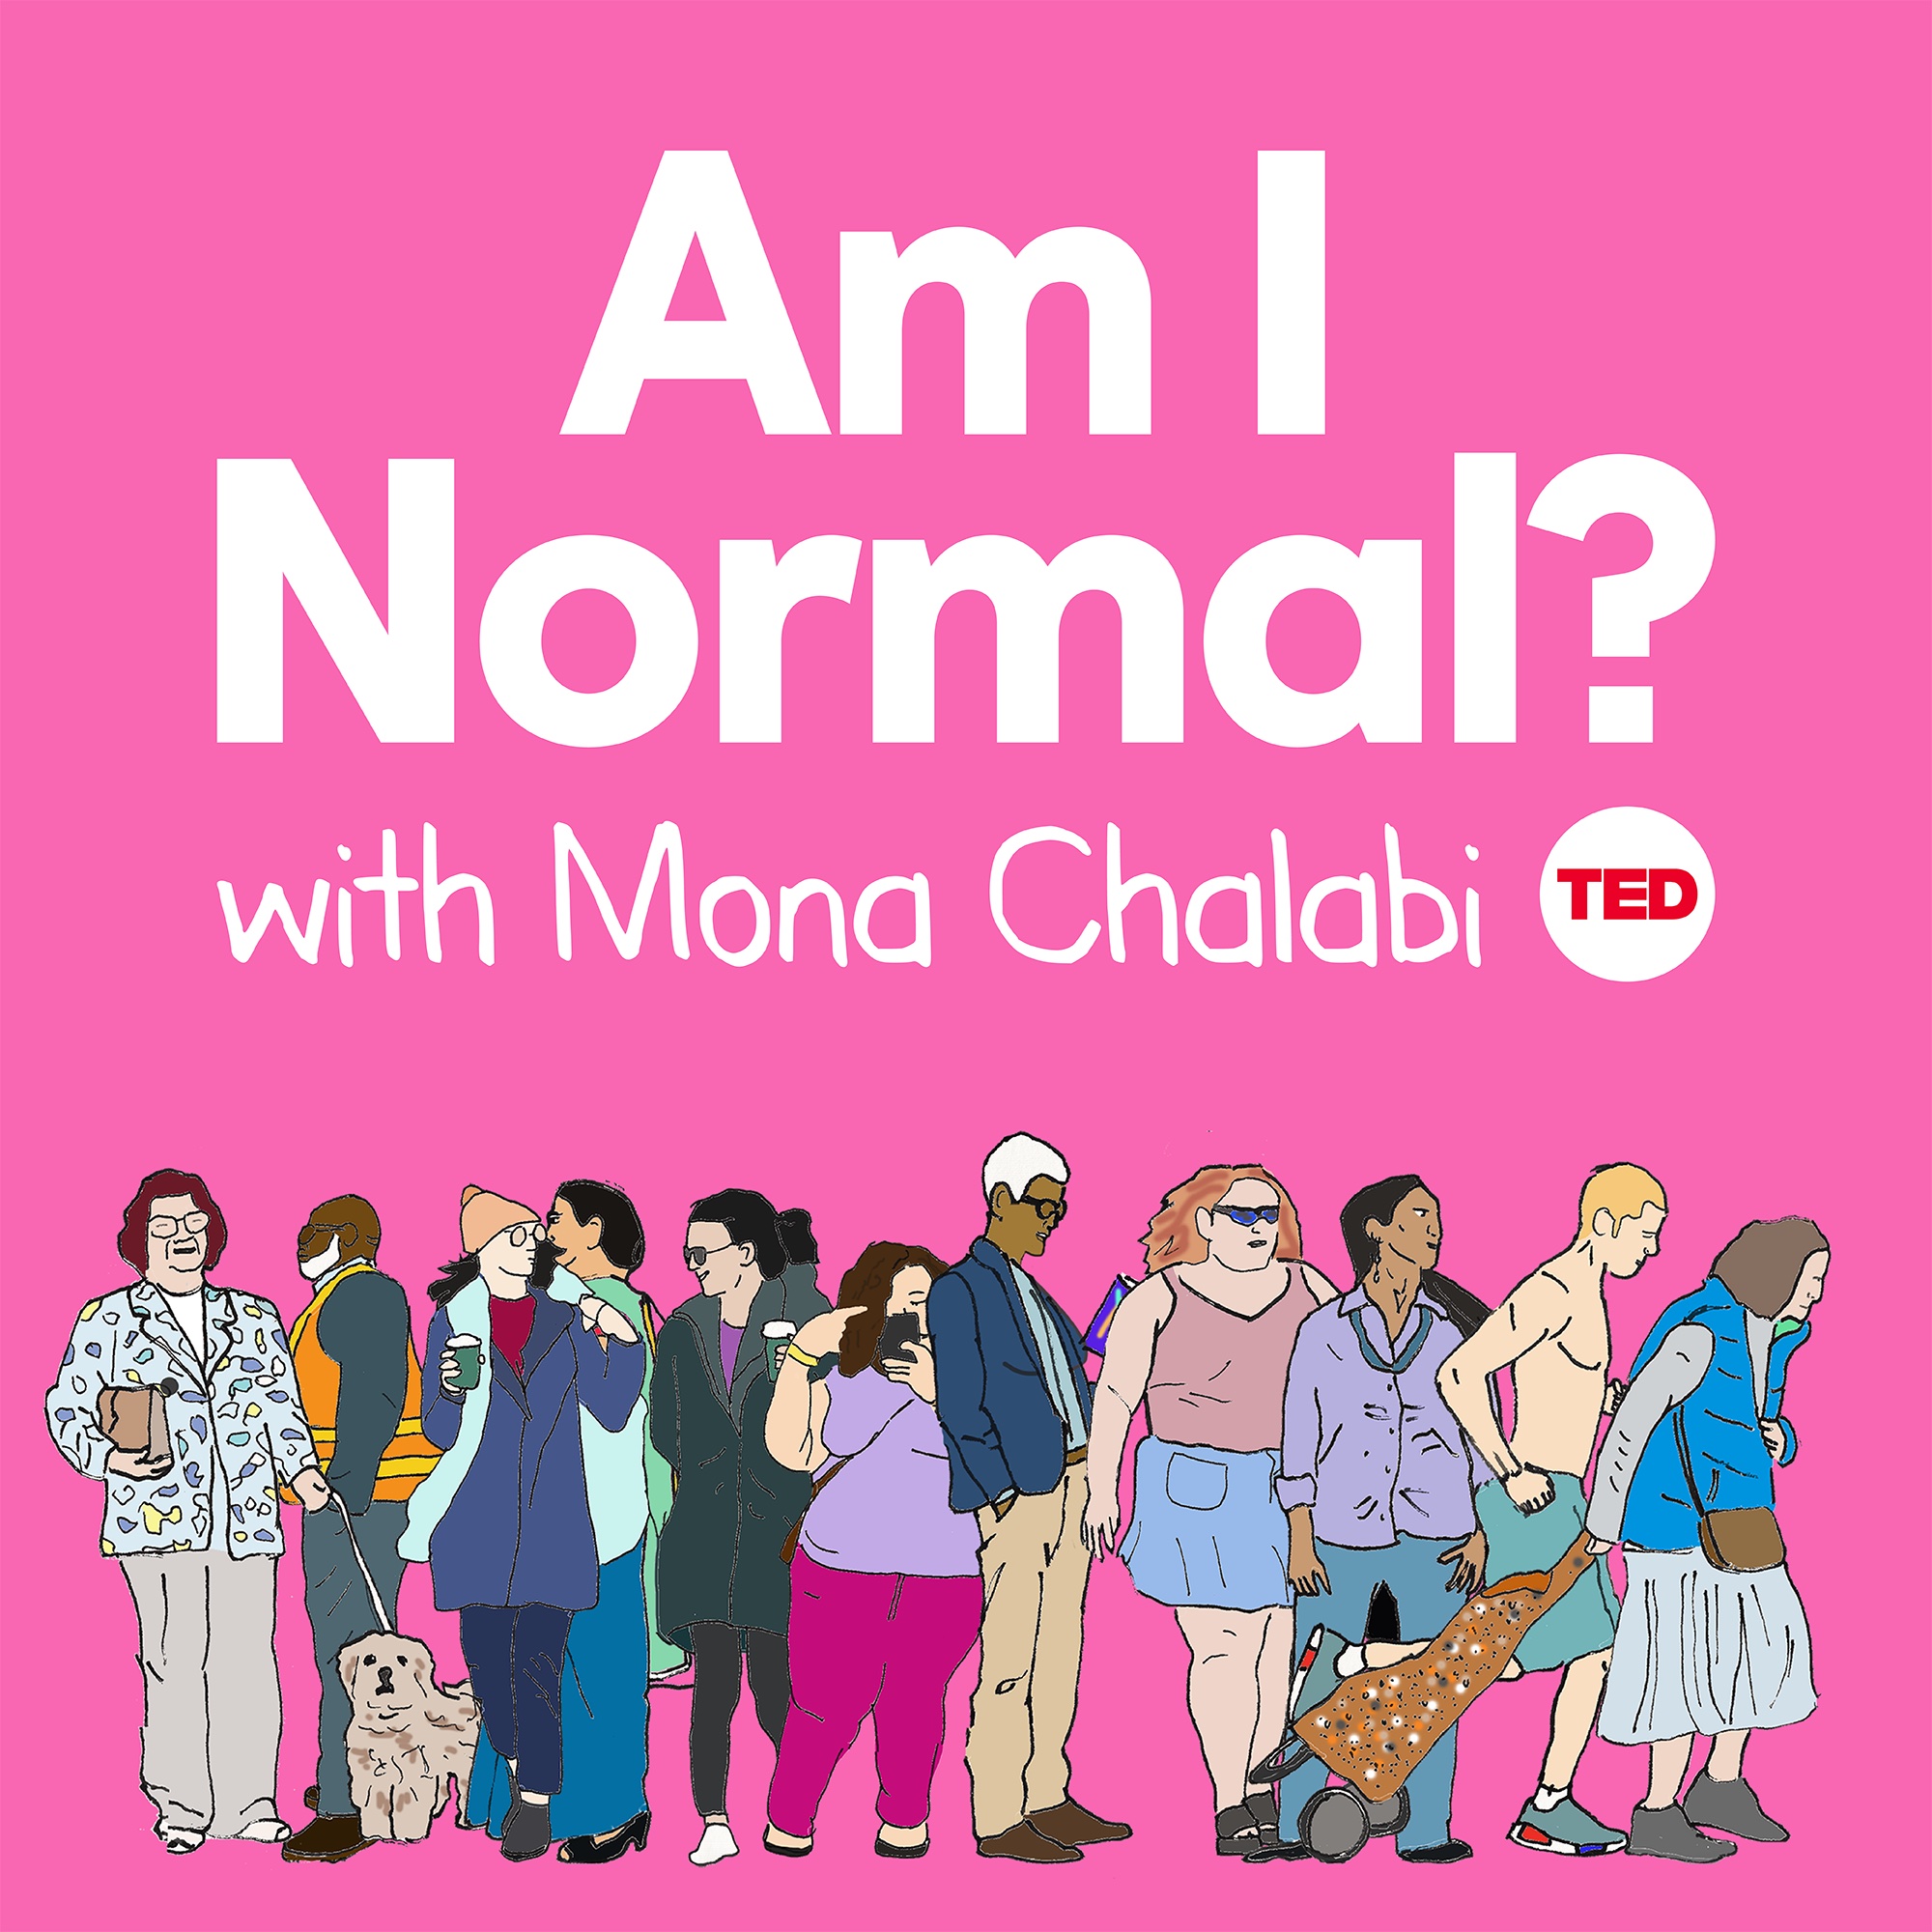 Am I Normal? with Mona Chalabi